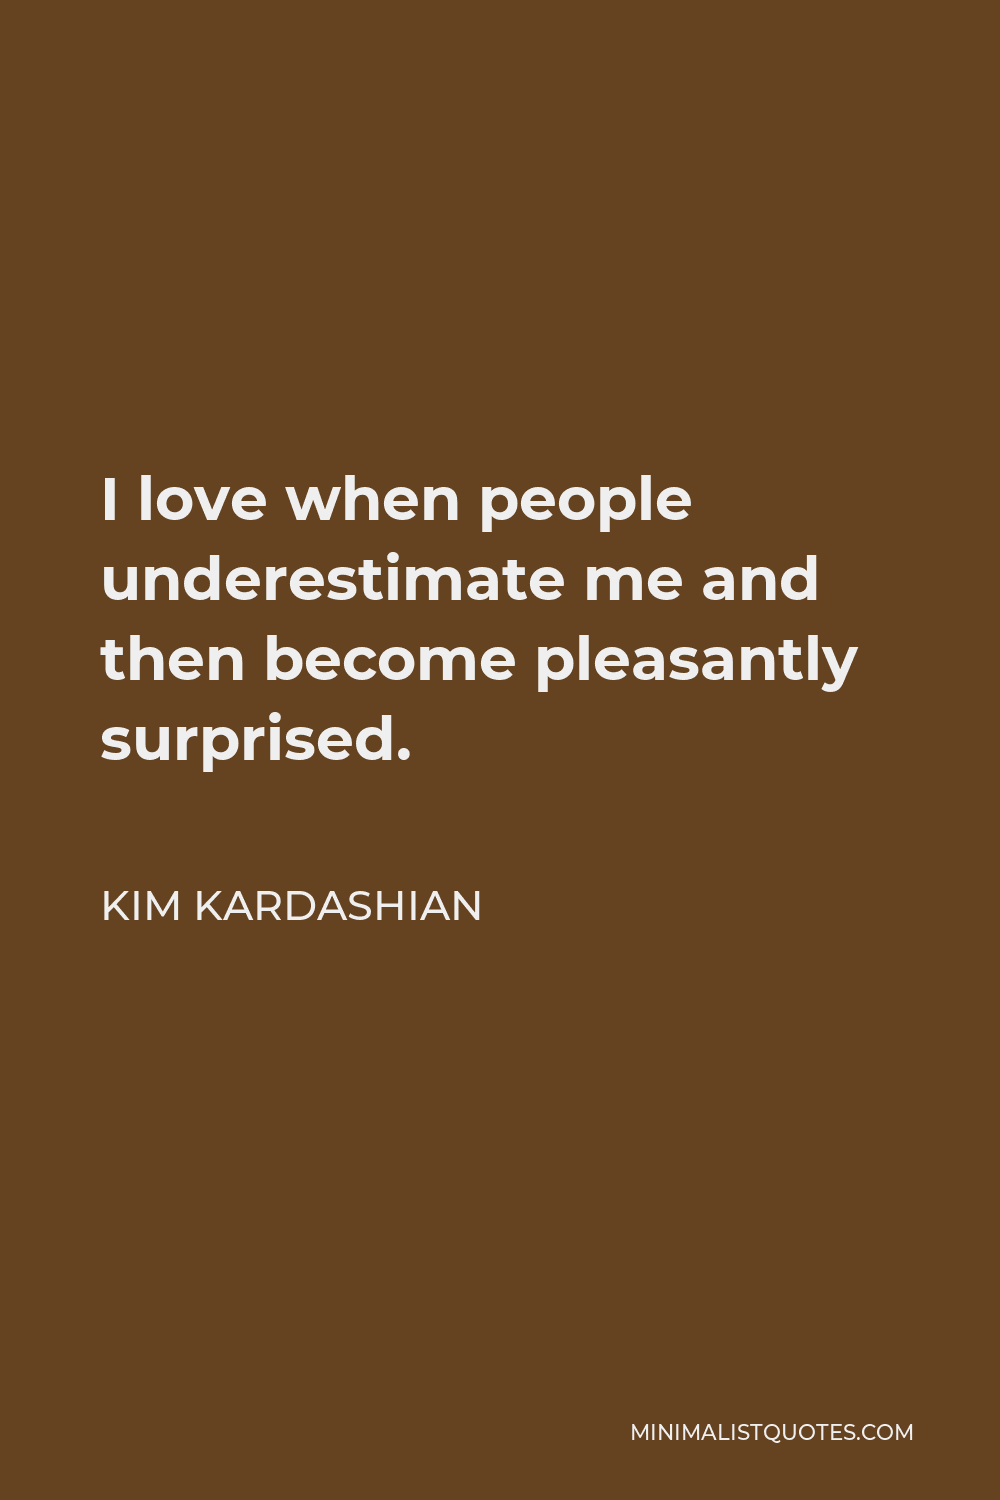 Kim Kardashian Quote - I love when people underestimate me and then become pleasantly surprised.